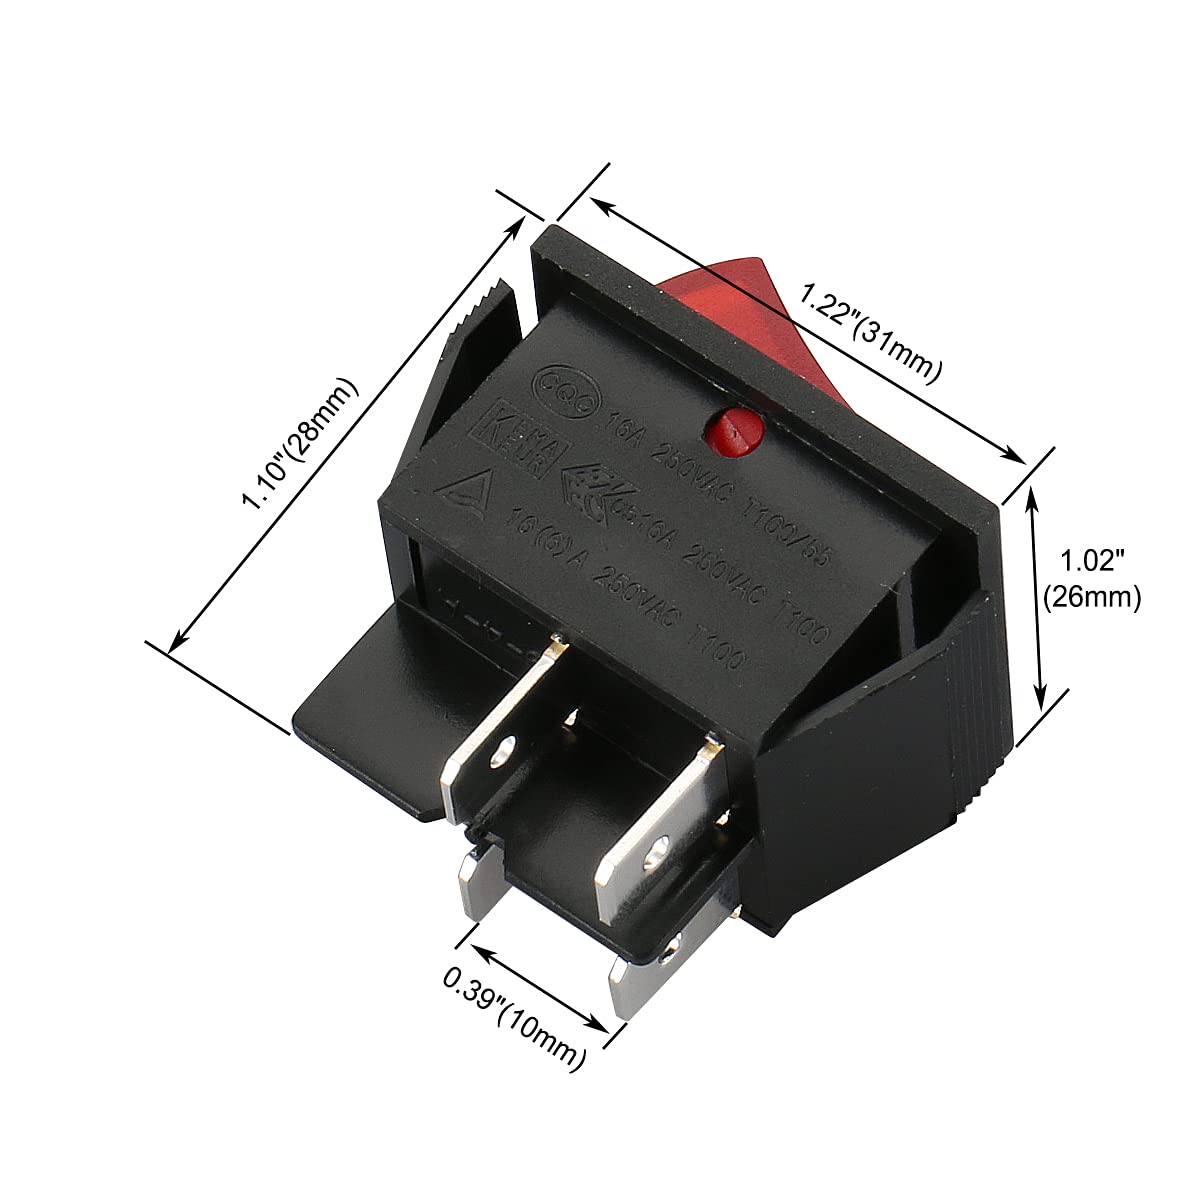 Baomain Red Light DPST ON/Off Snap in Boat Rocker Switch 4 Pin 16A/250V UL TUV List 1 Pack